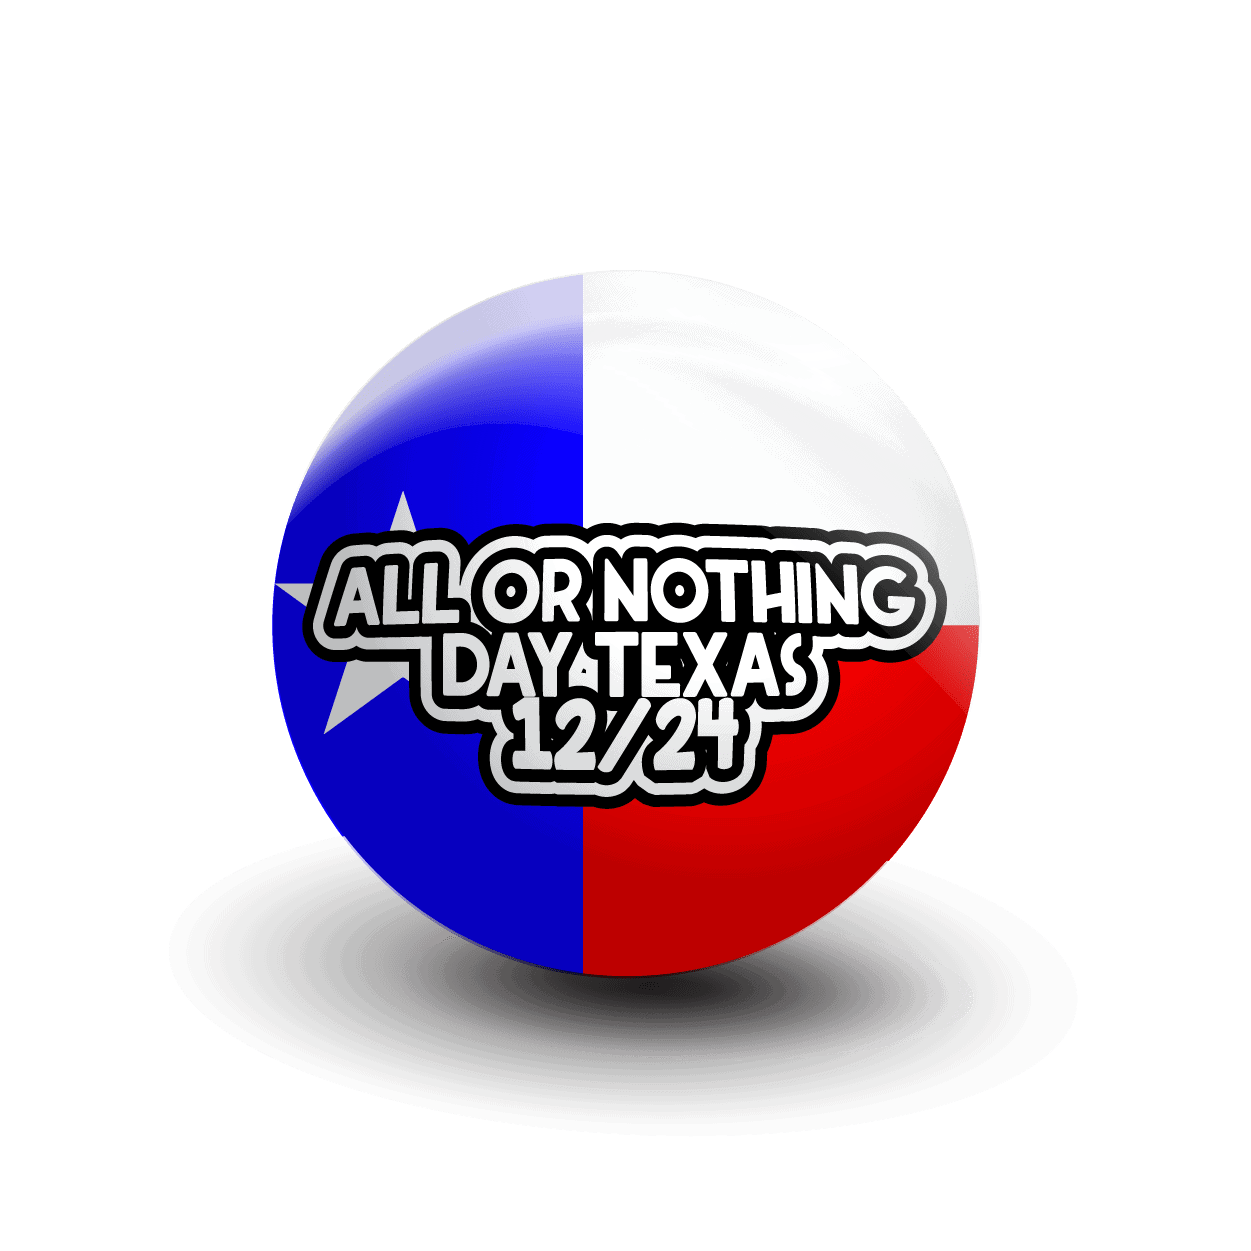 All Or Nothing DayTexas 12/24